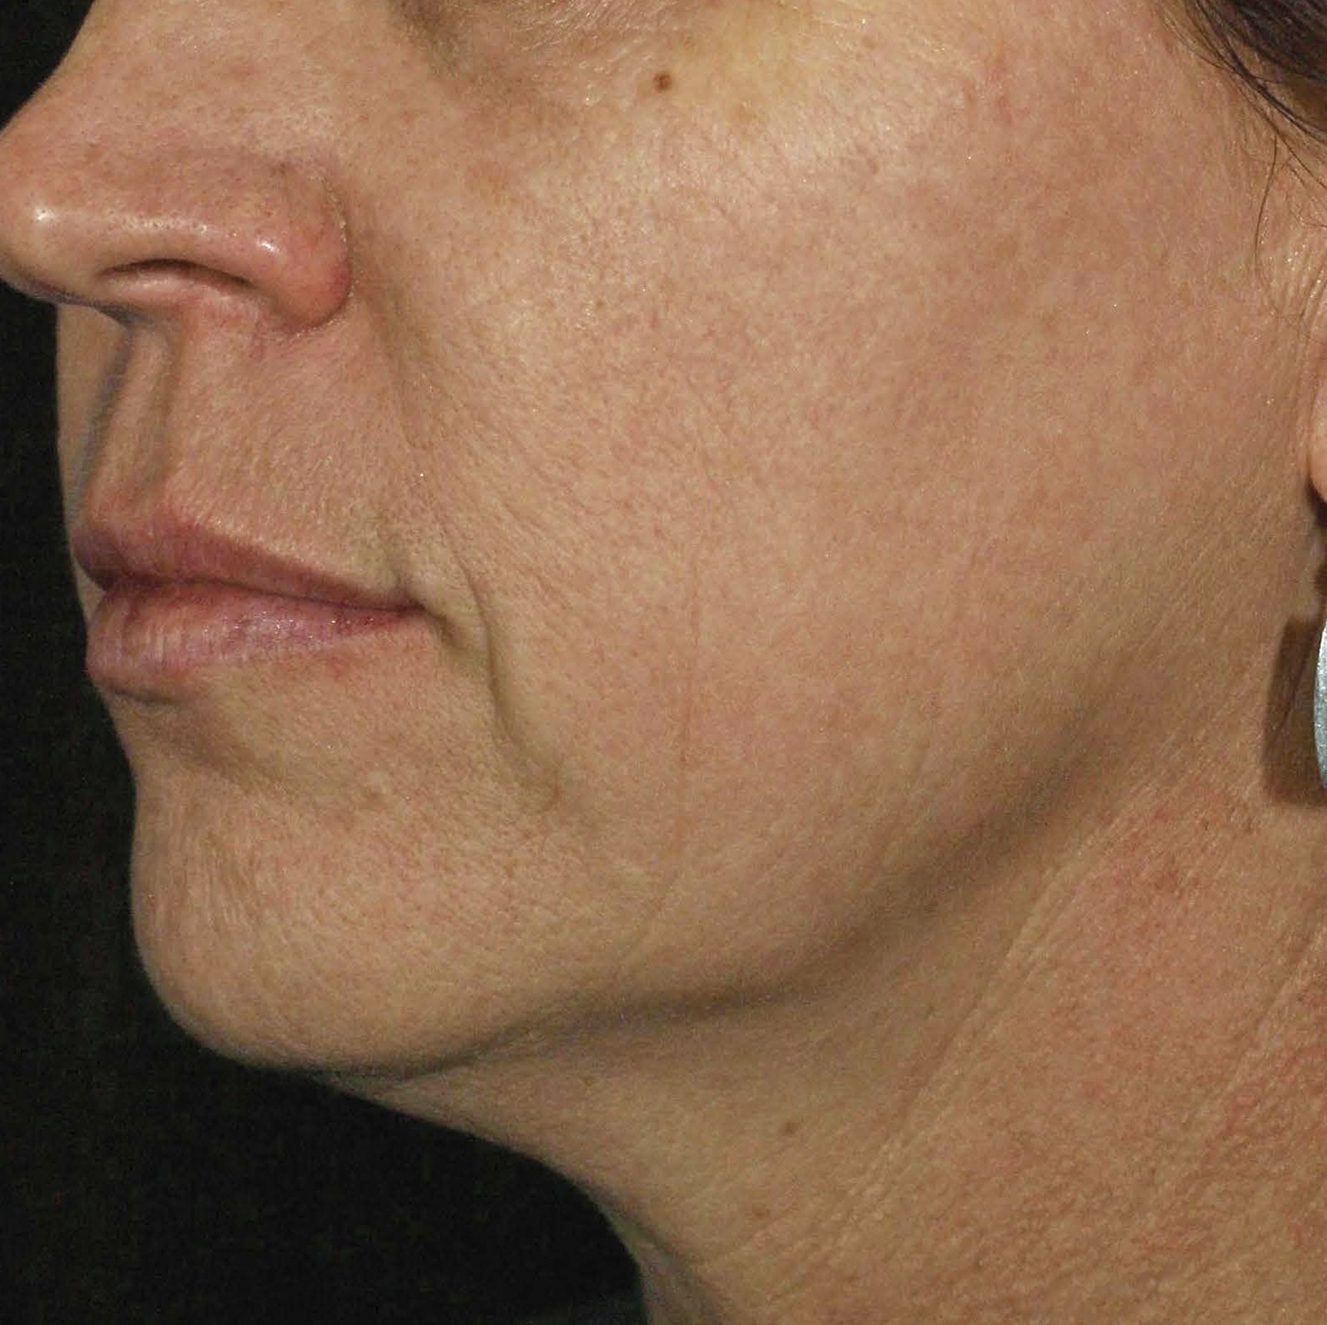 Skintyte After Treatment Image